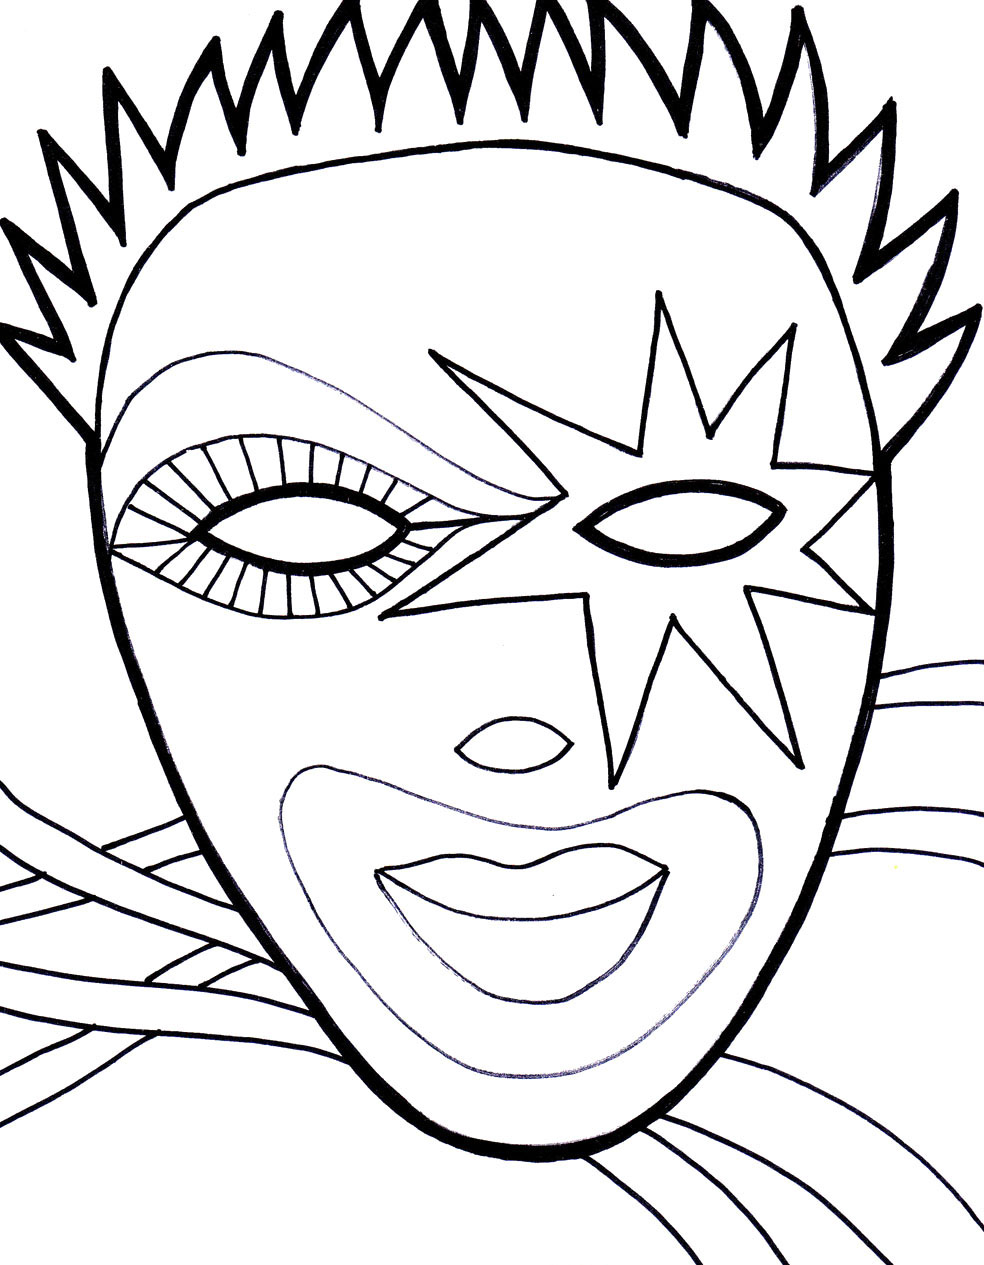 Print And Color Mask Coloring Page